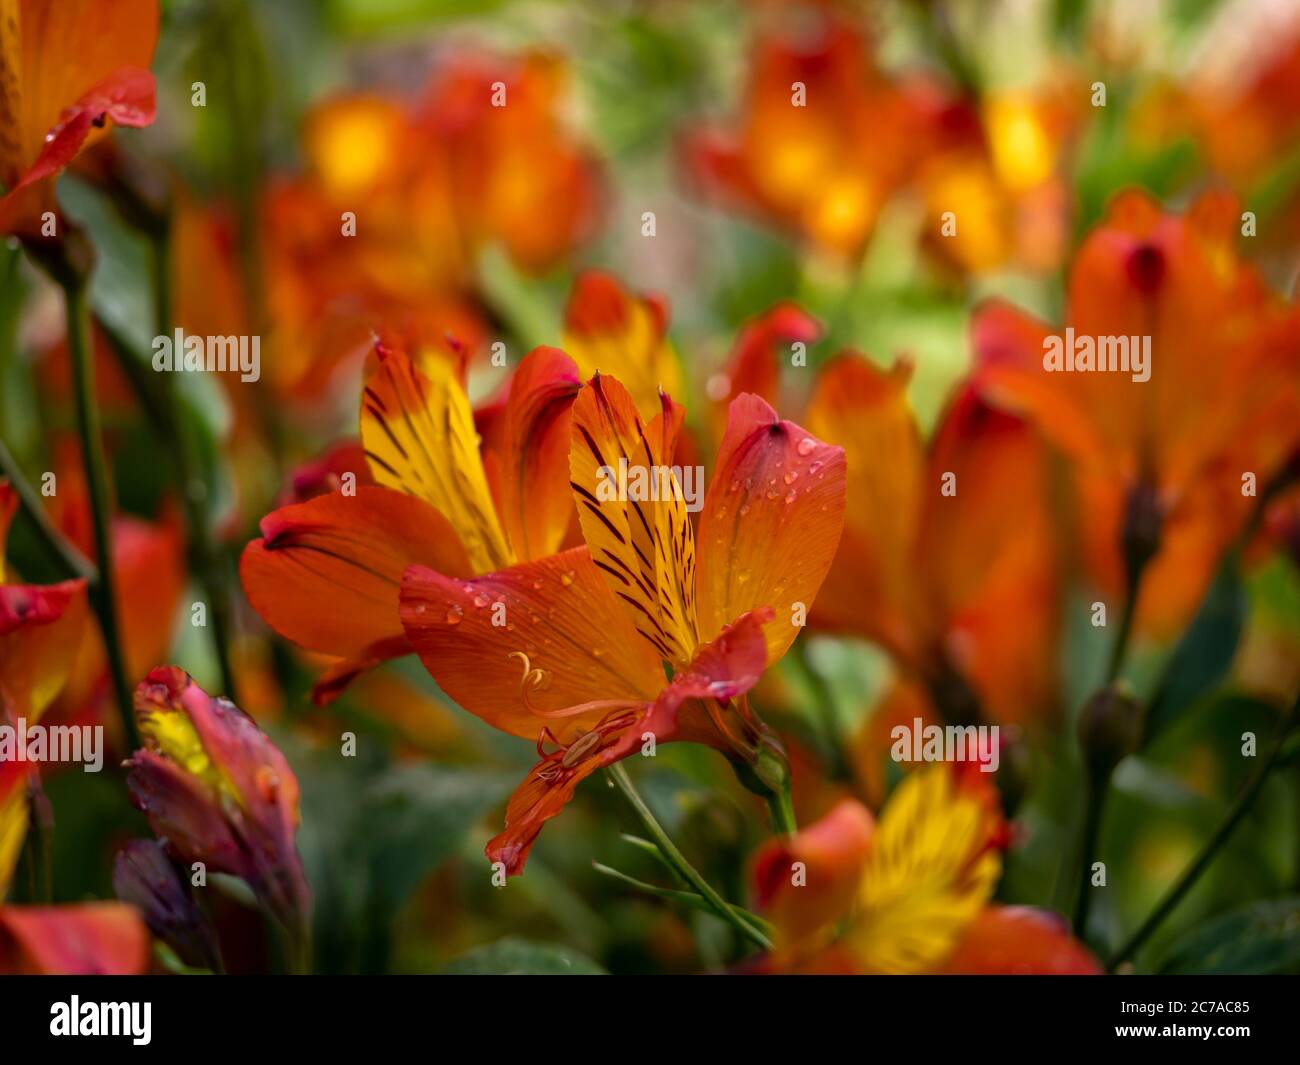 Closeup of the beautiful orange and yellow flowers of the Peruvian lily Alstroemeria Flaming Star Stock Photo